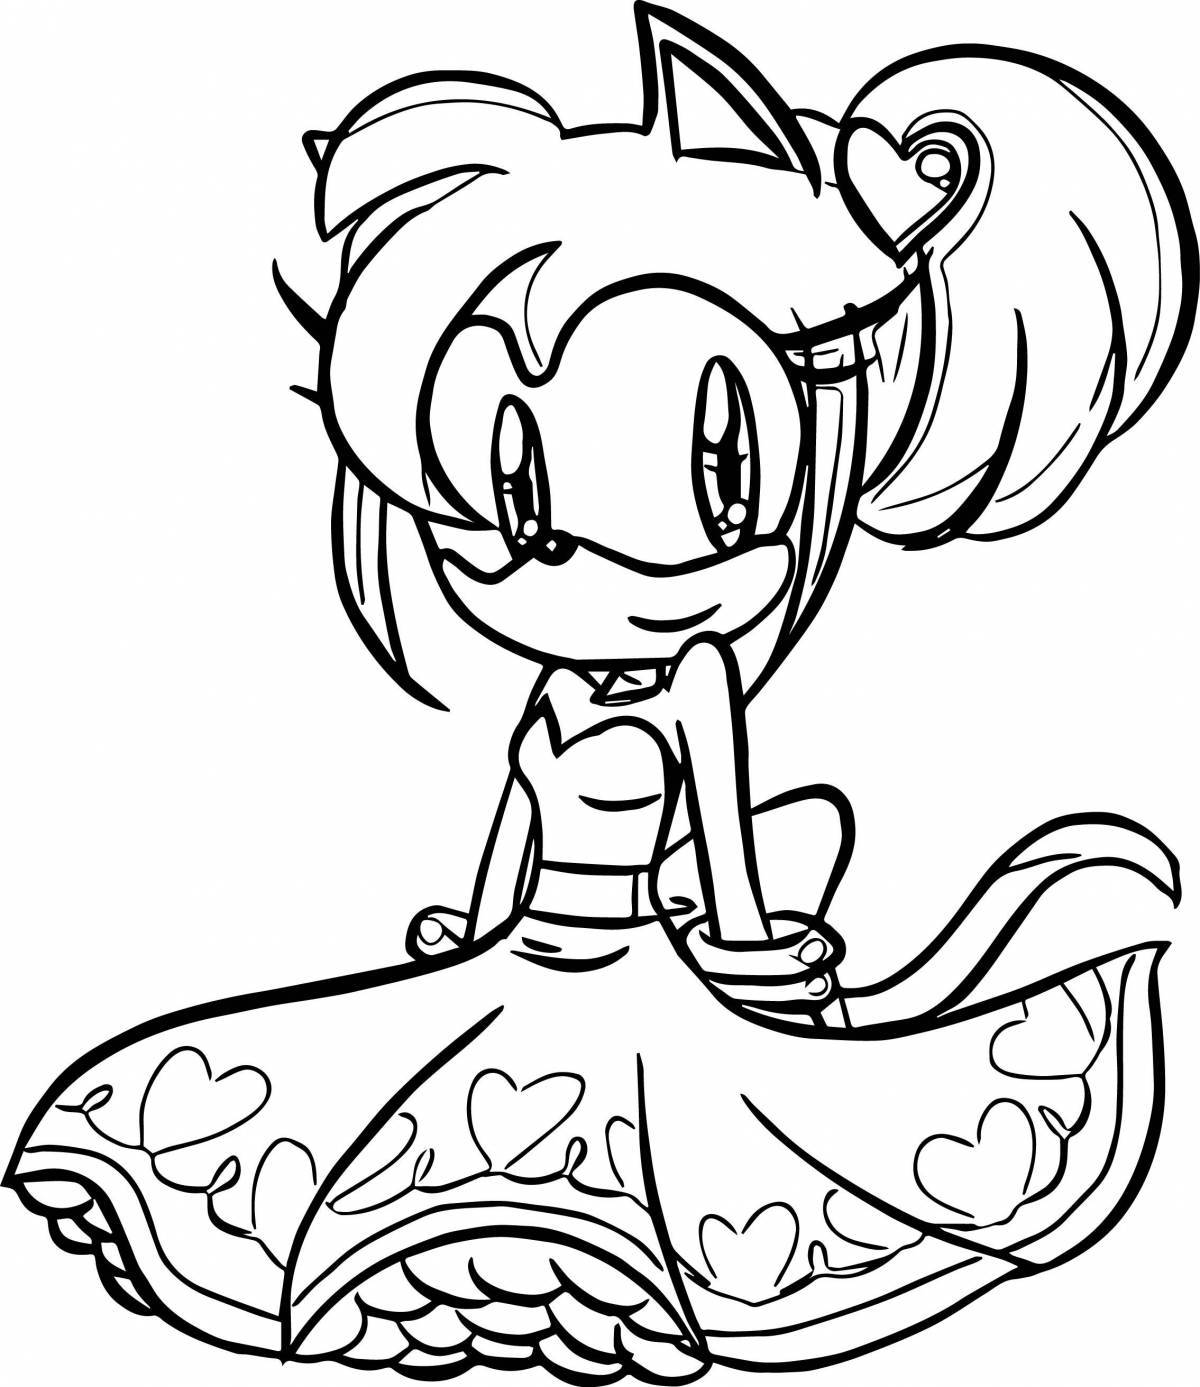 Colouring amy rose obsessed with flowers